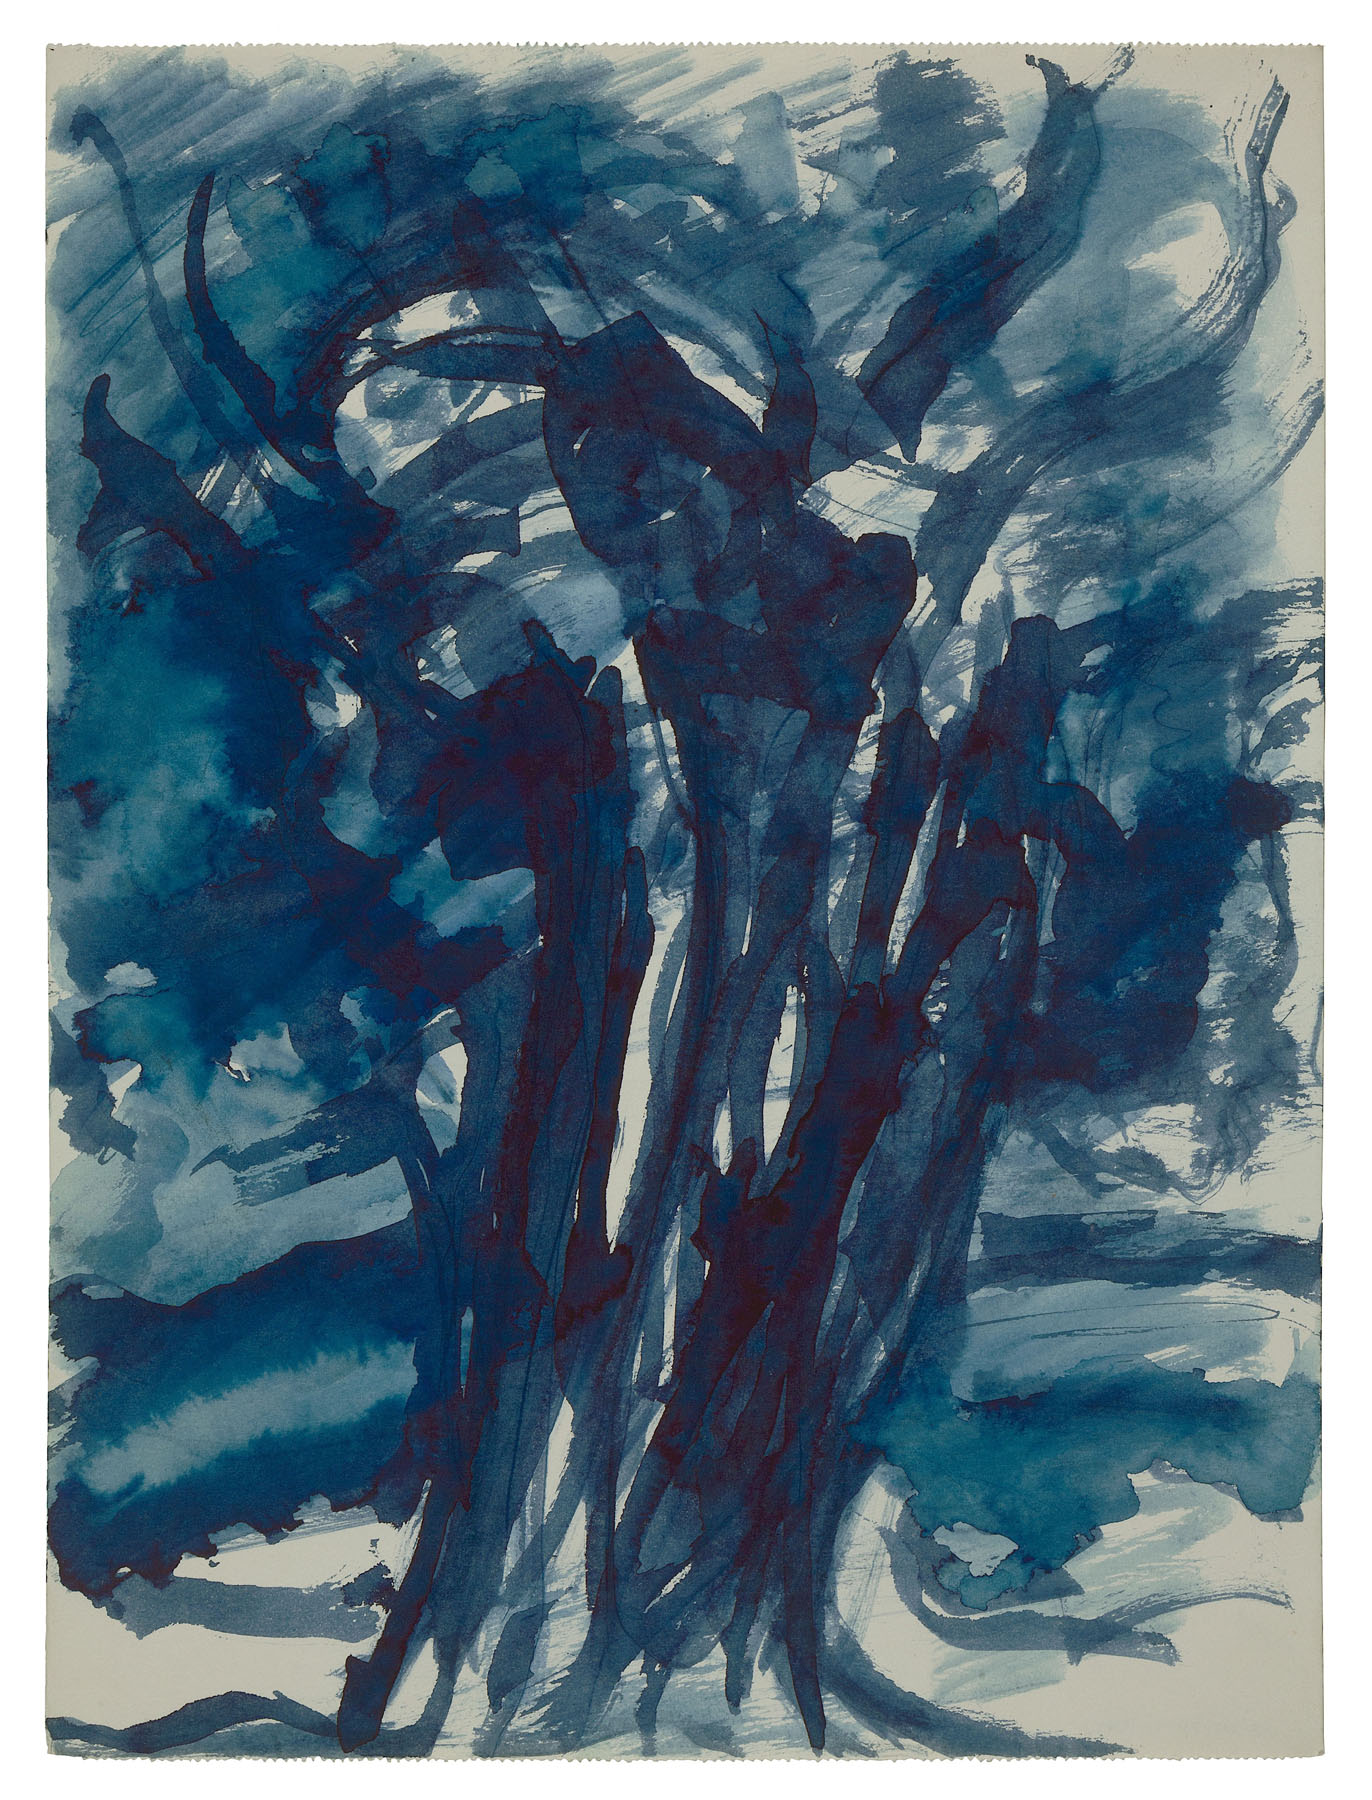 Tree, c. 1960. Blue watercolour on paper, 15.7 x 11.6 in. (40 x 29.5 cm). Private collection. Photo Malcolm Varon ©Bianca Stock